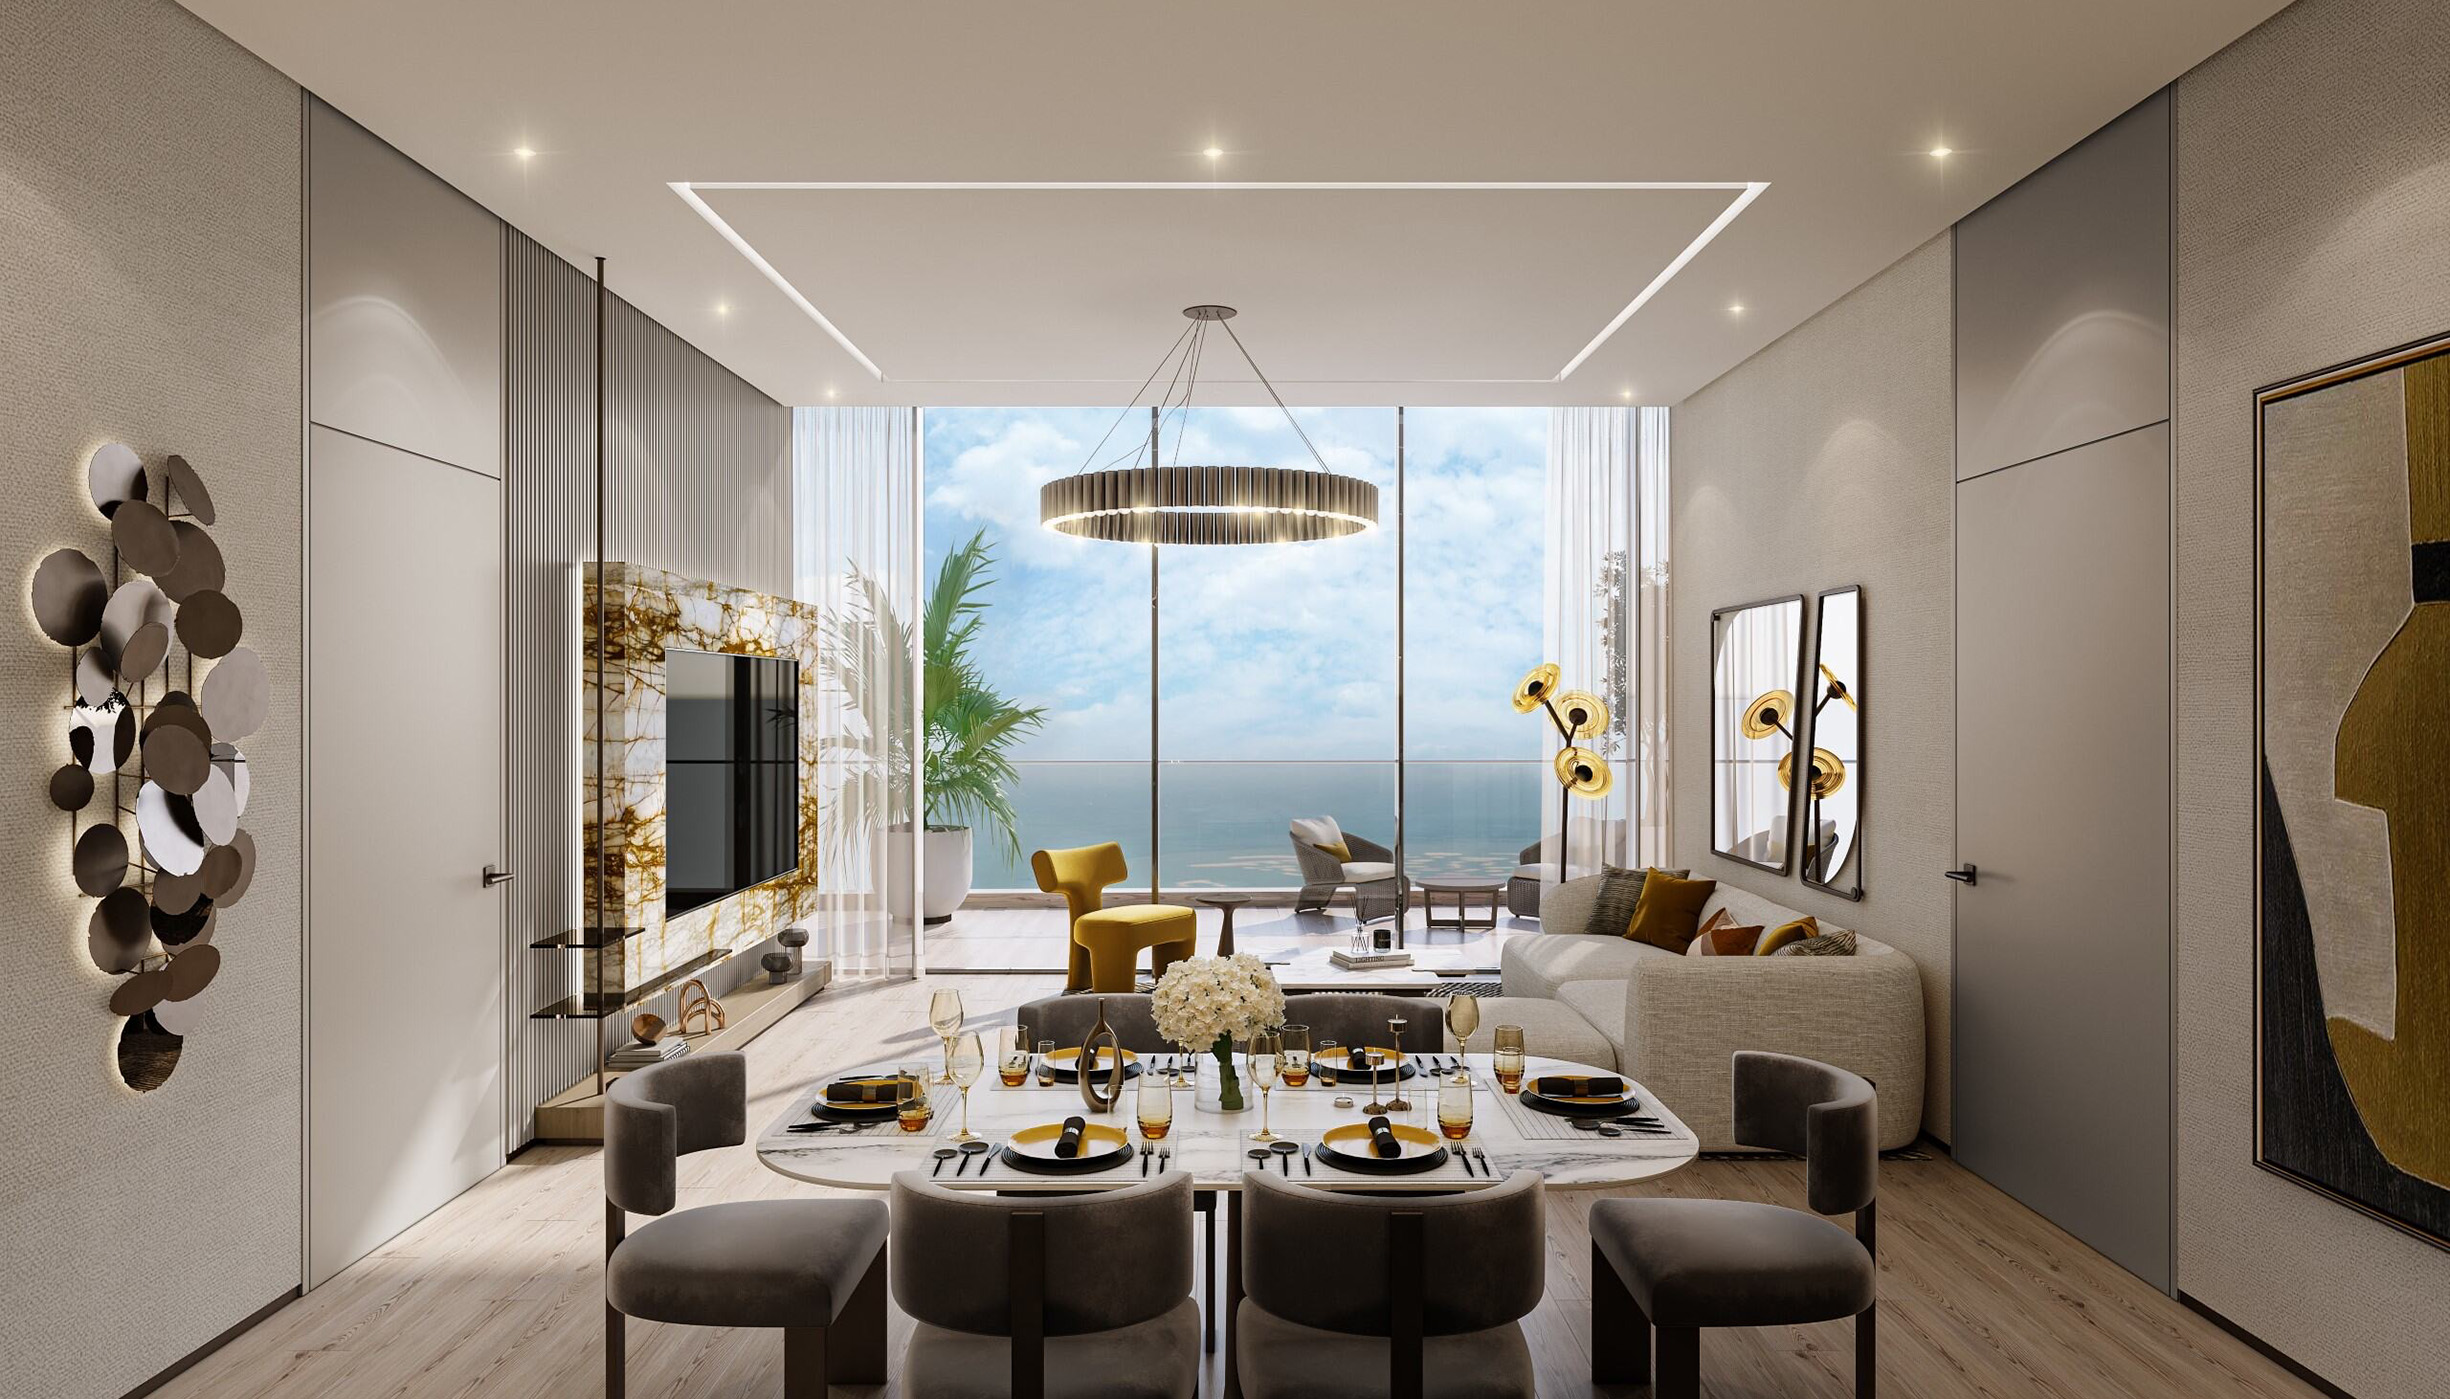 uploads/sale_property/3-bedroom-apartment-for-sale-in-the-sapphire-by-damac/908cc7f5bd36c53d9be0577eeabc6133.webp